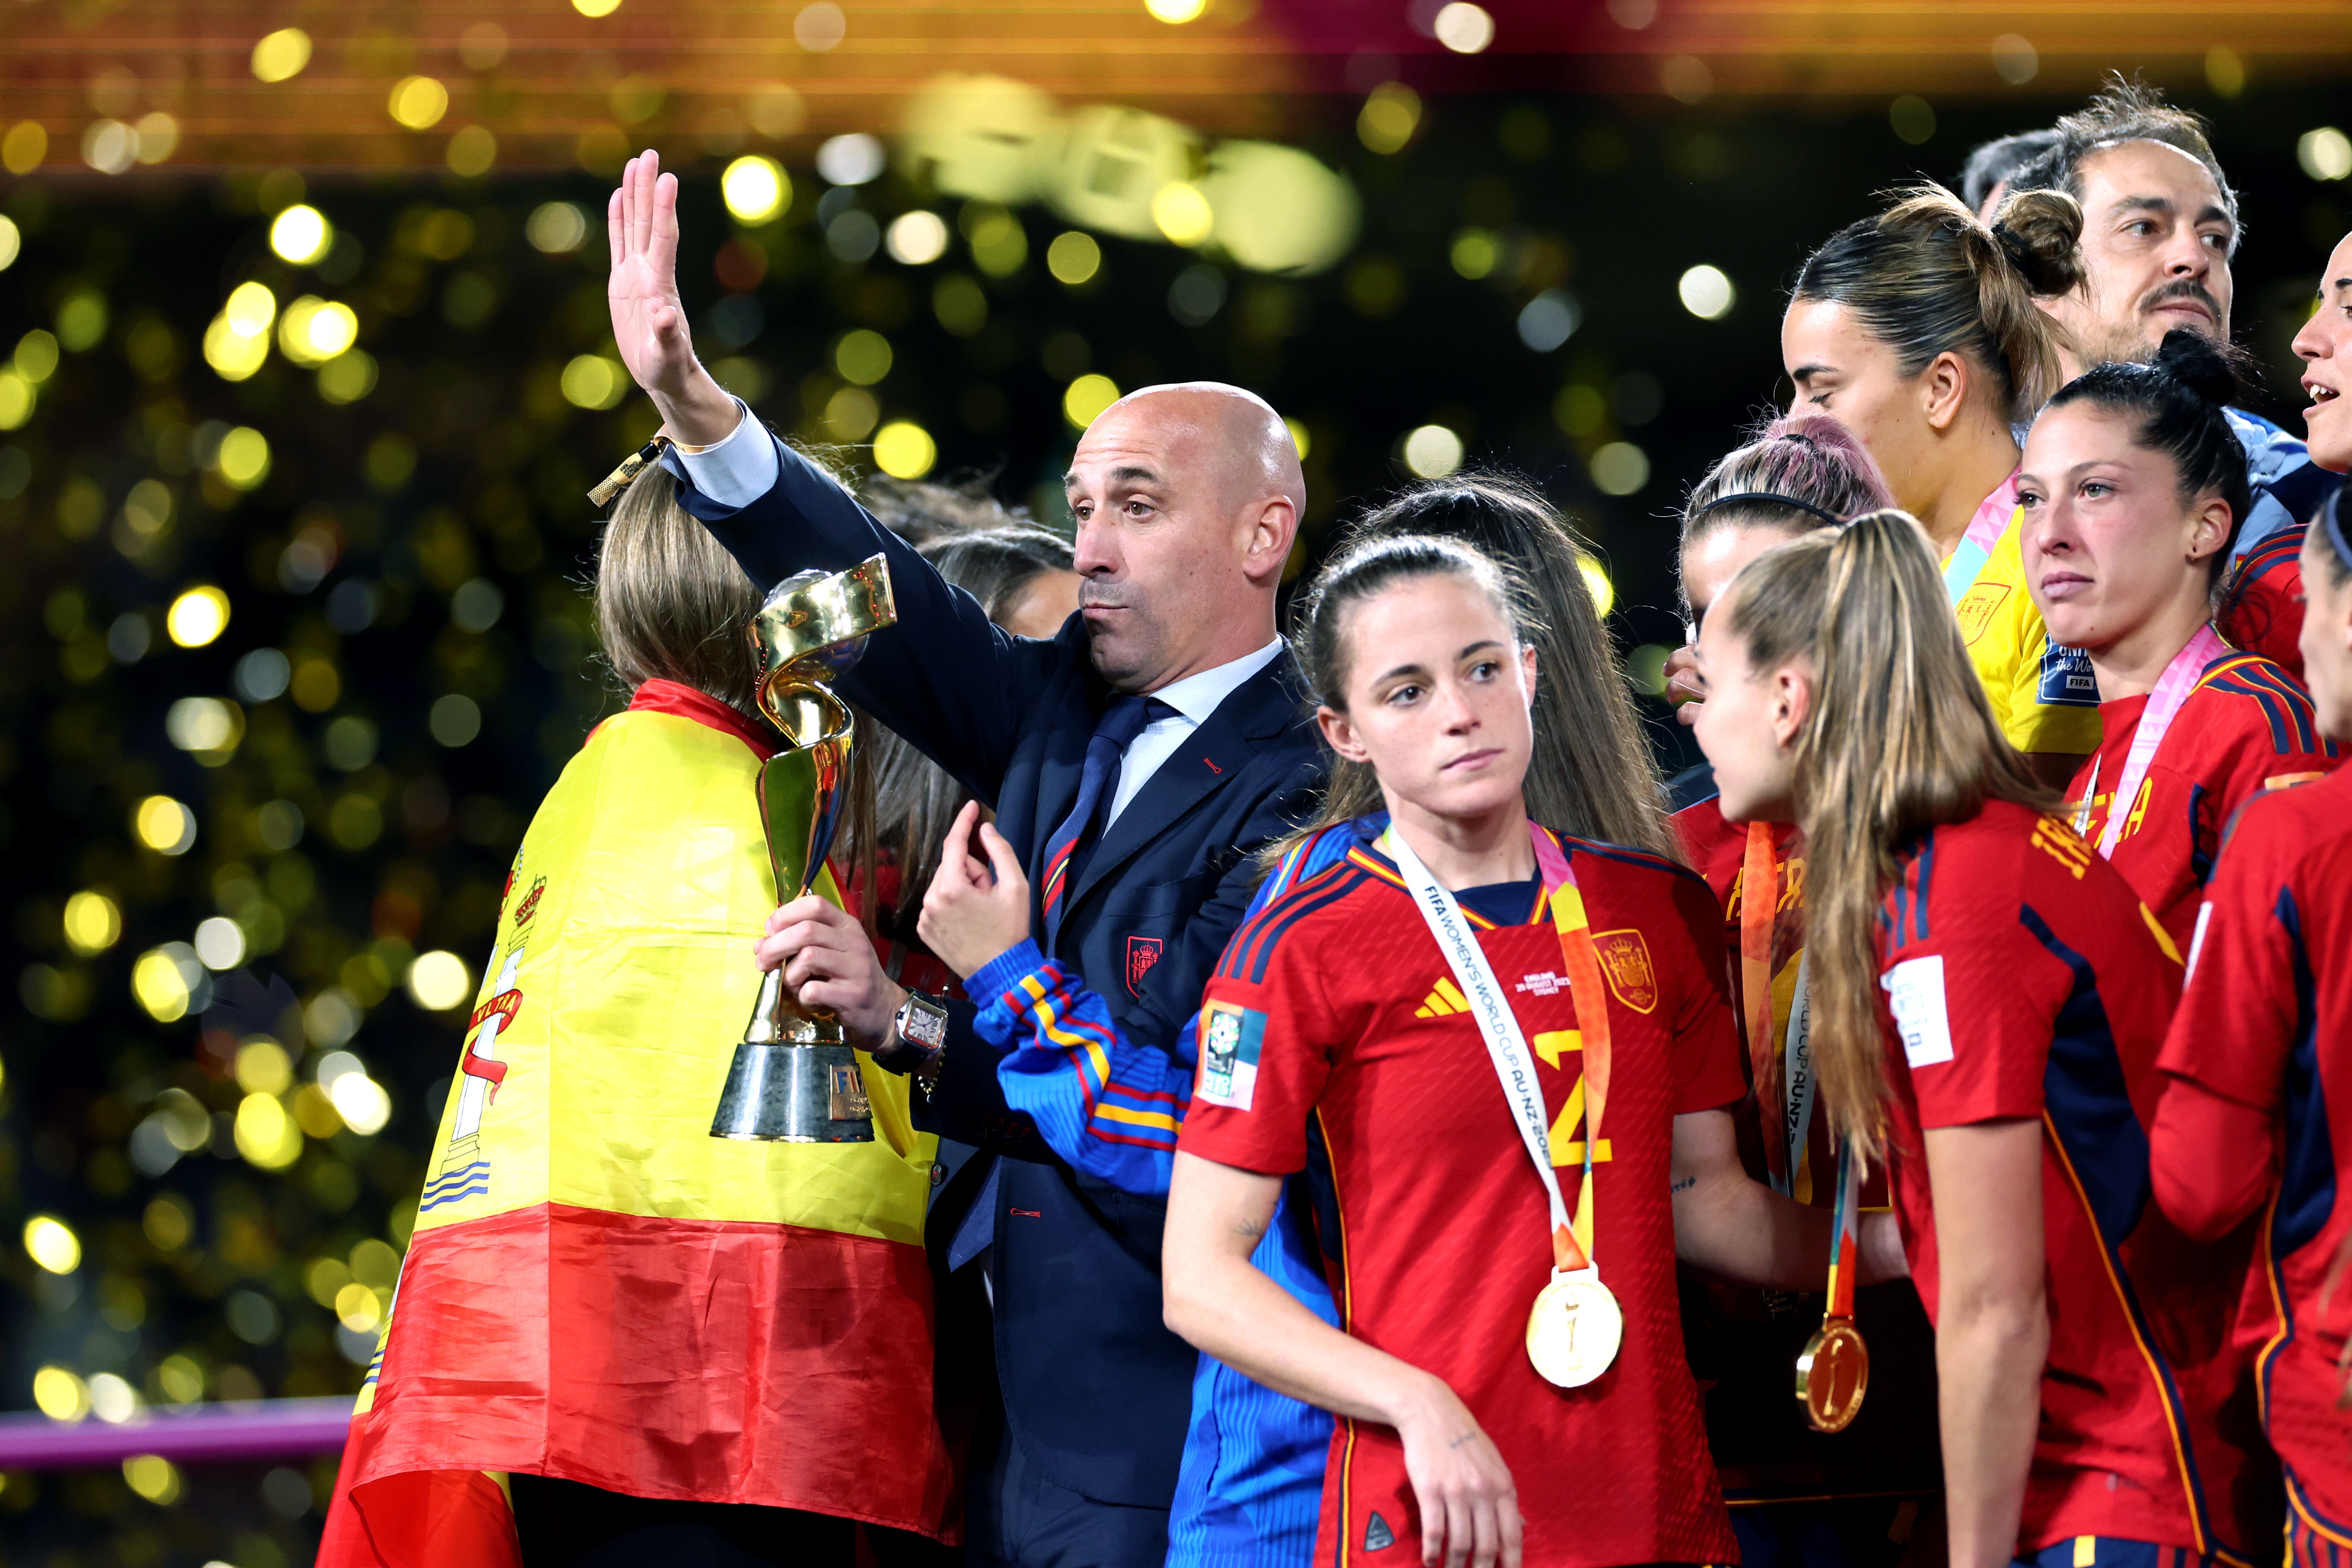 Spanish football federation president Luis Rubiales following the FIFA Women’s World Cup final (Isabel Infantes/PA)